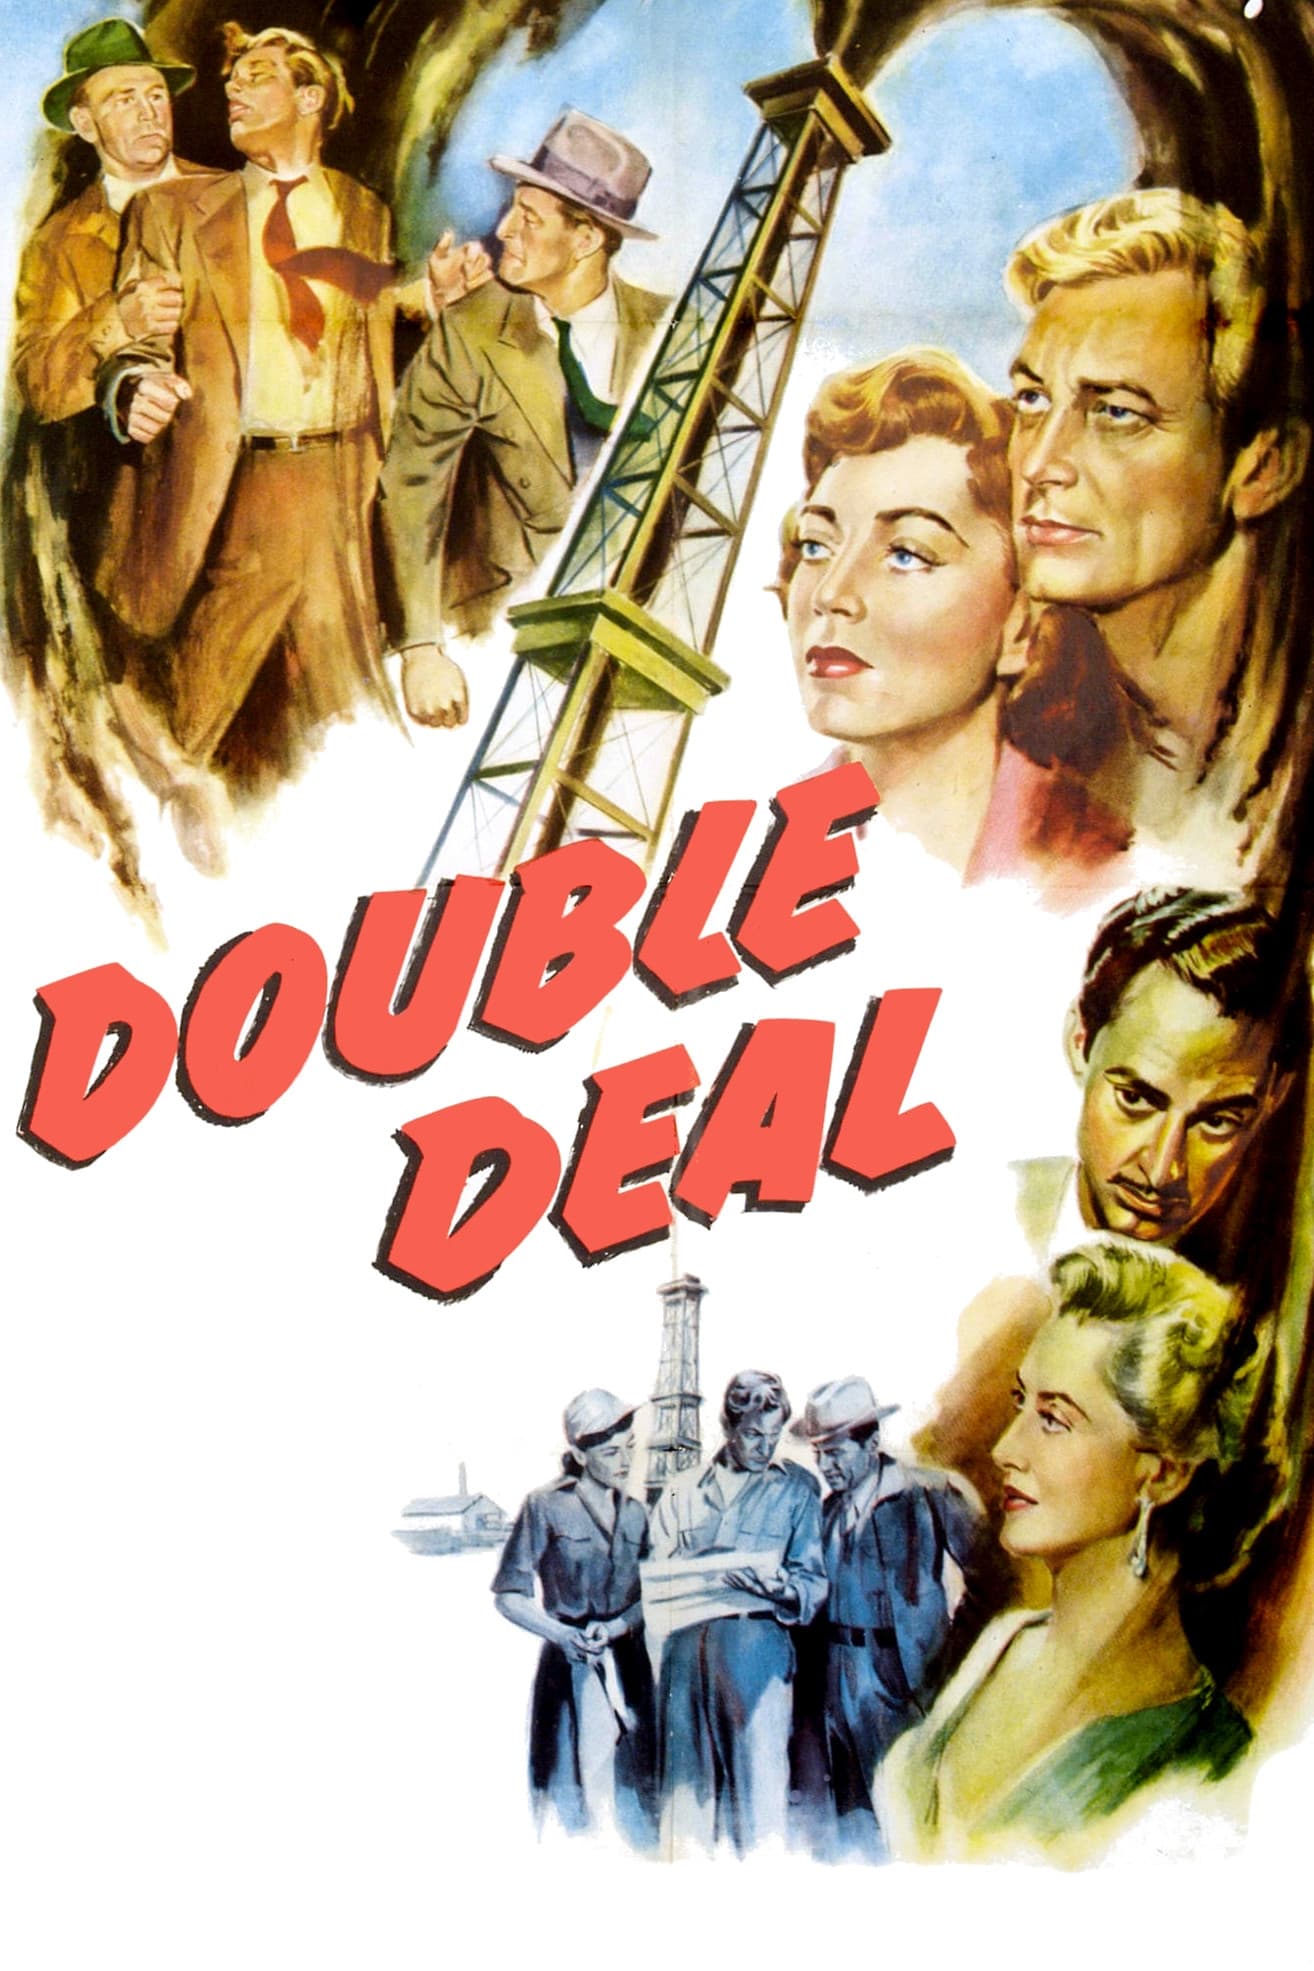 Double Deal (1950)